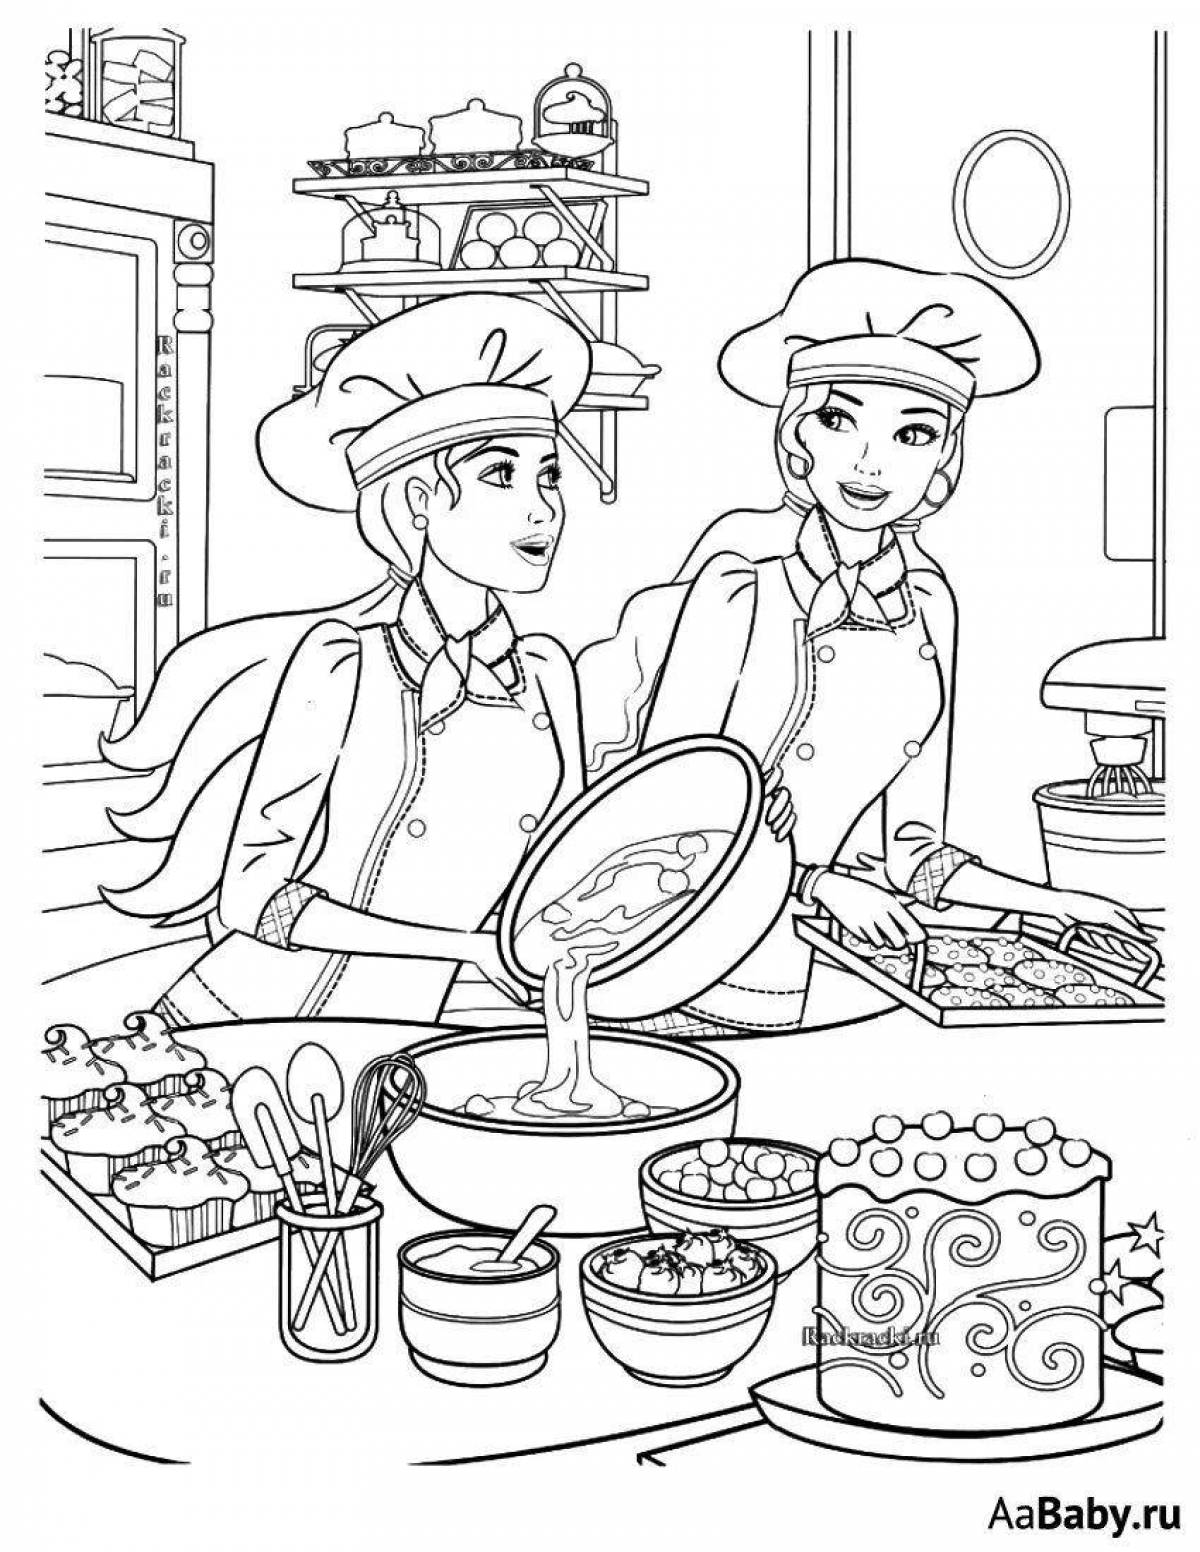 Pastry chef coloring page